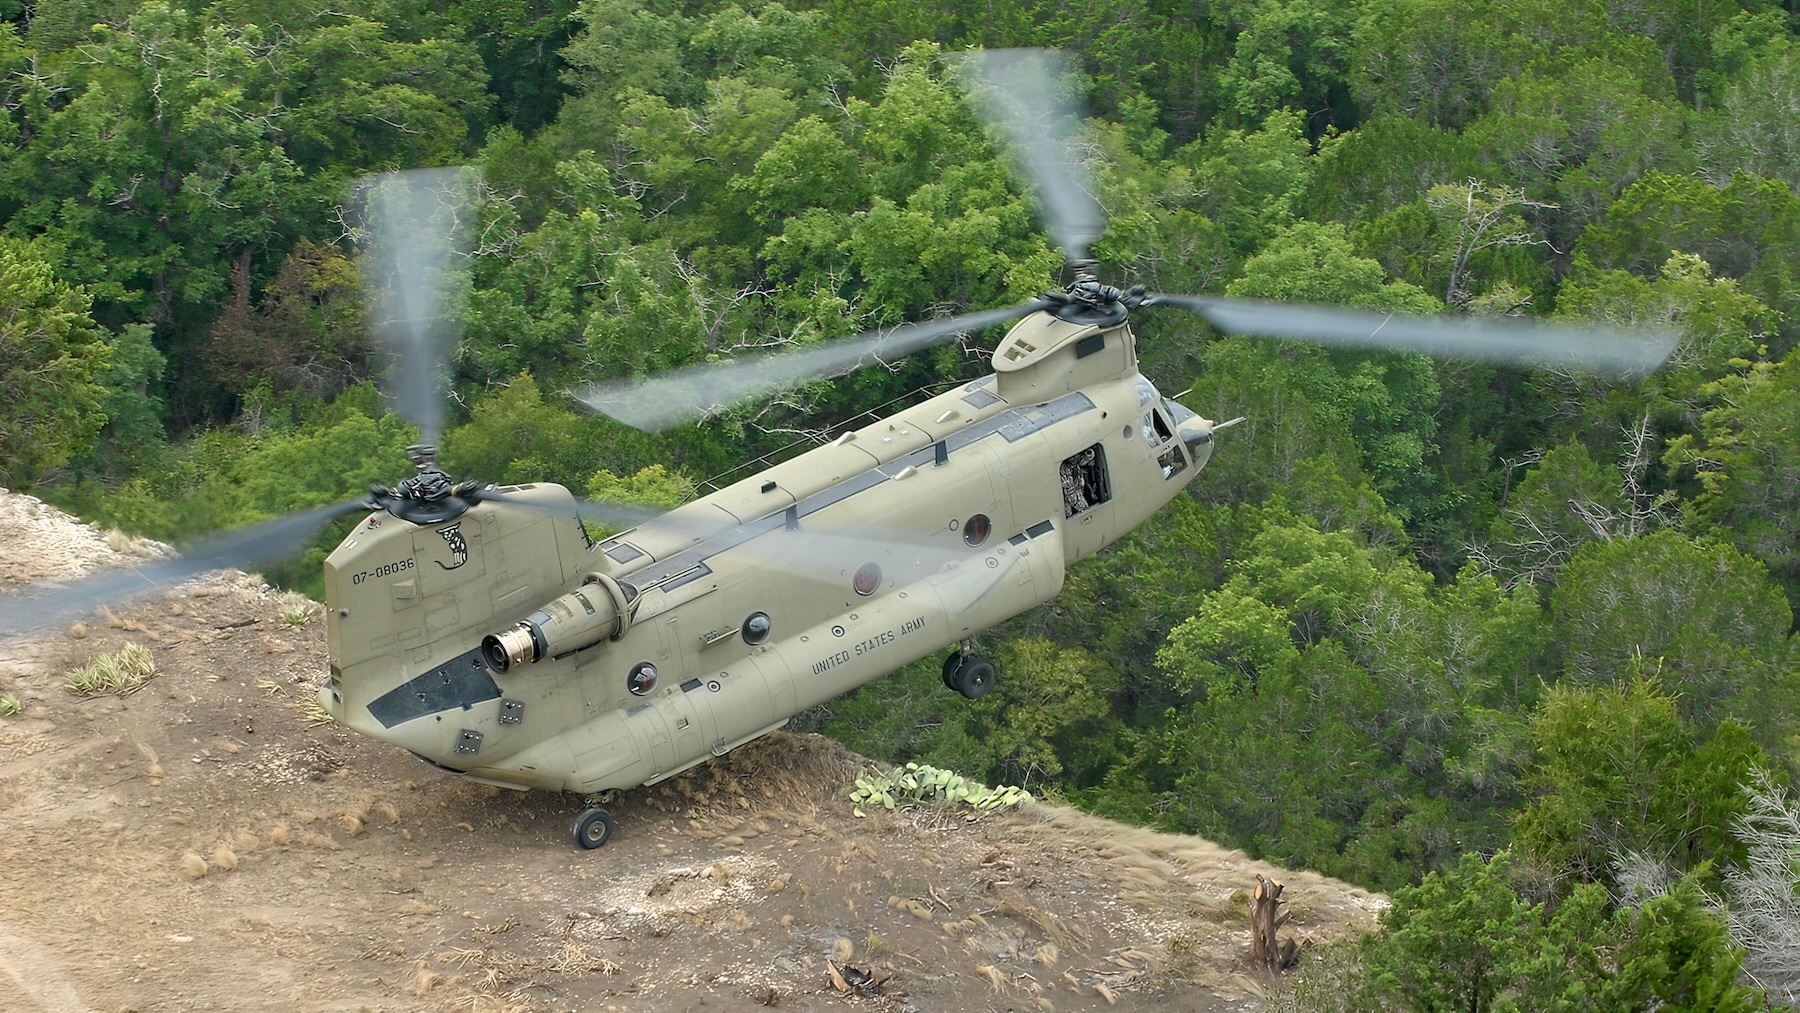 CH-47F Chinook helicopter